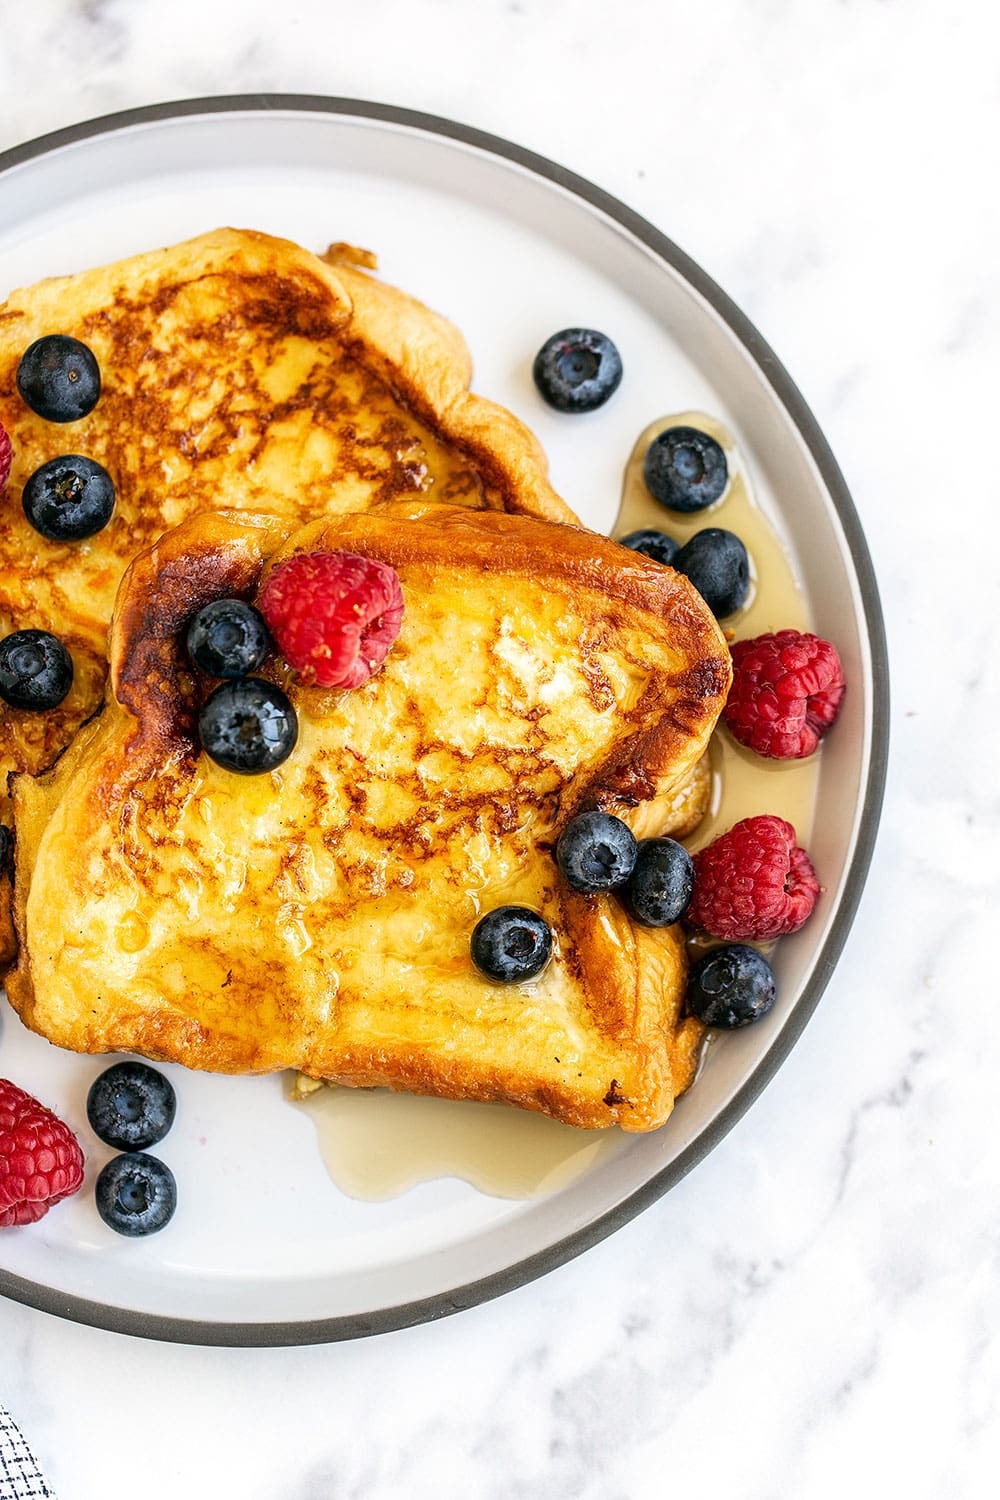 Two slices of French toast recipe on a plate with maple syrup and berries